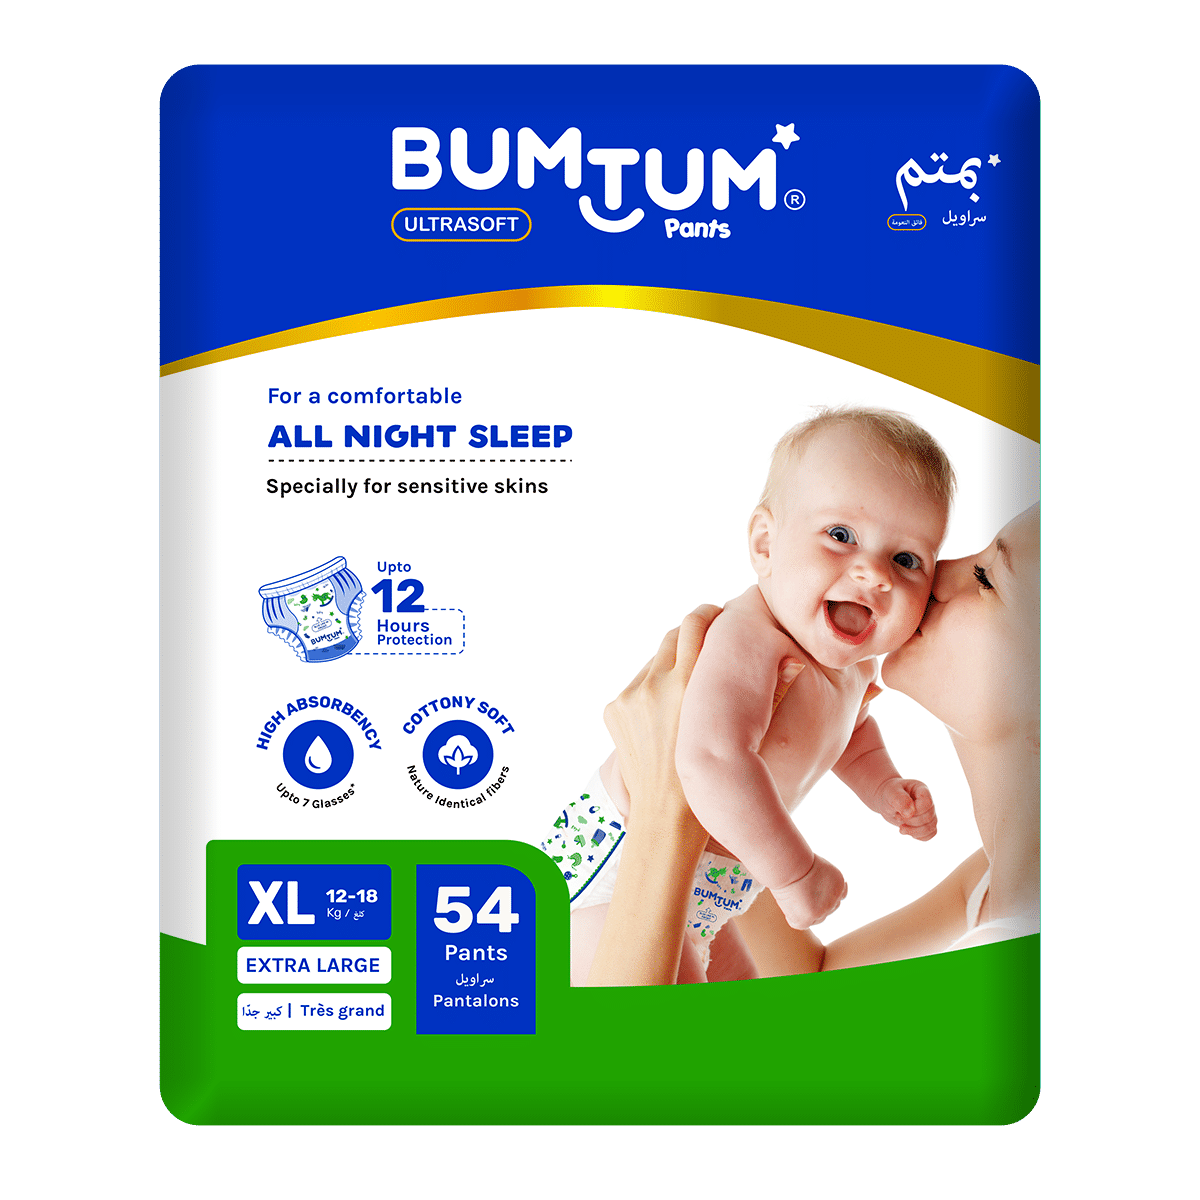 Bumtum Chota Bheem Baby Diaper Pants with Leakage Protection -7 to 12 Kg  (Medium, 72 Count, Pack of 1)